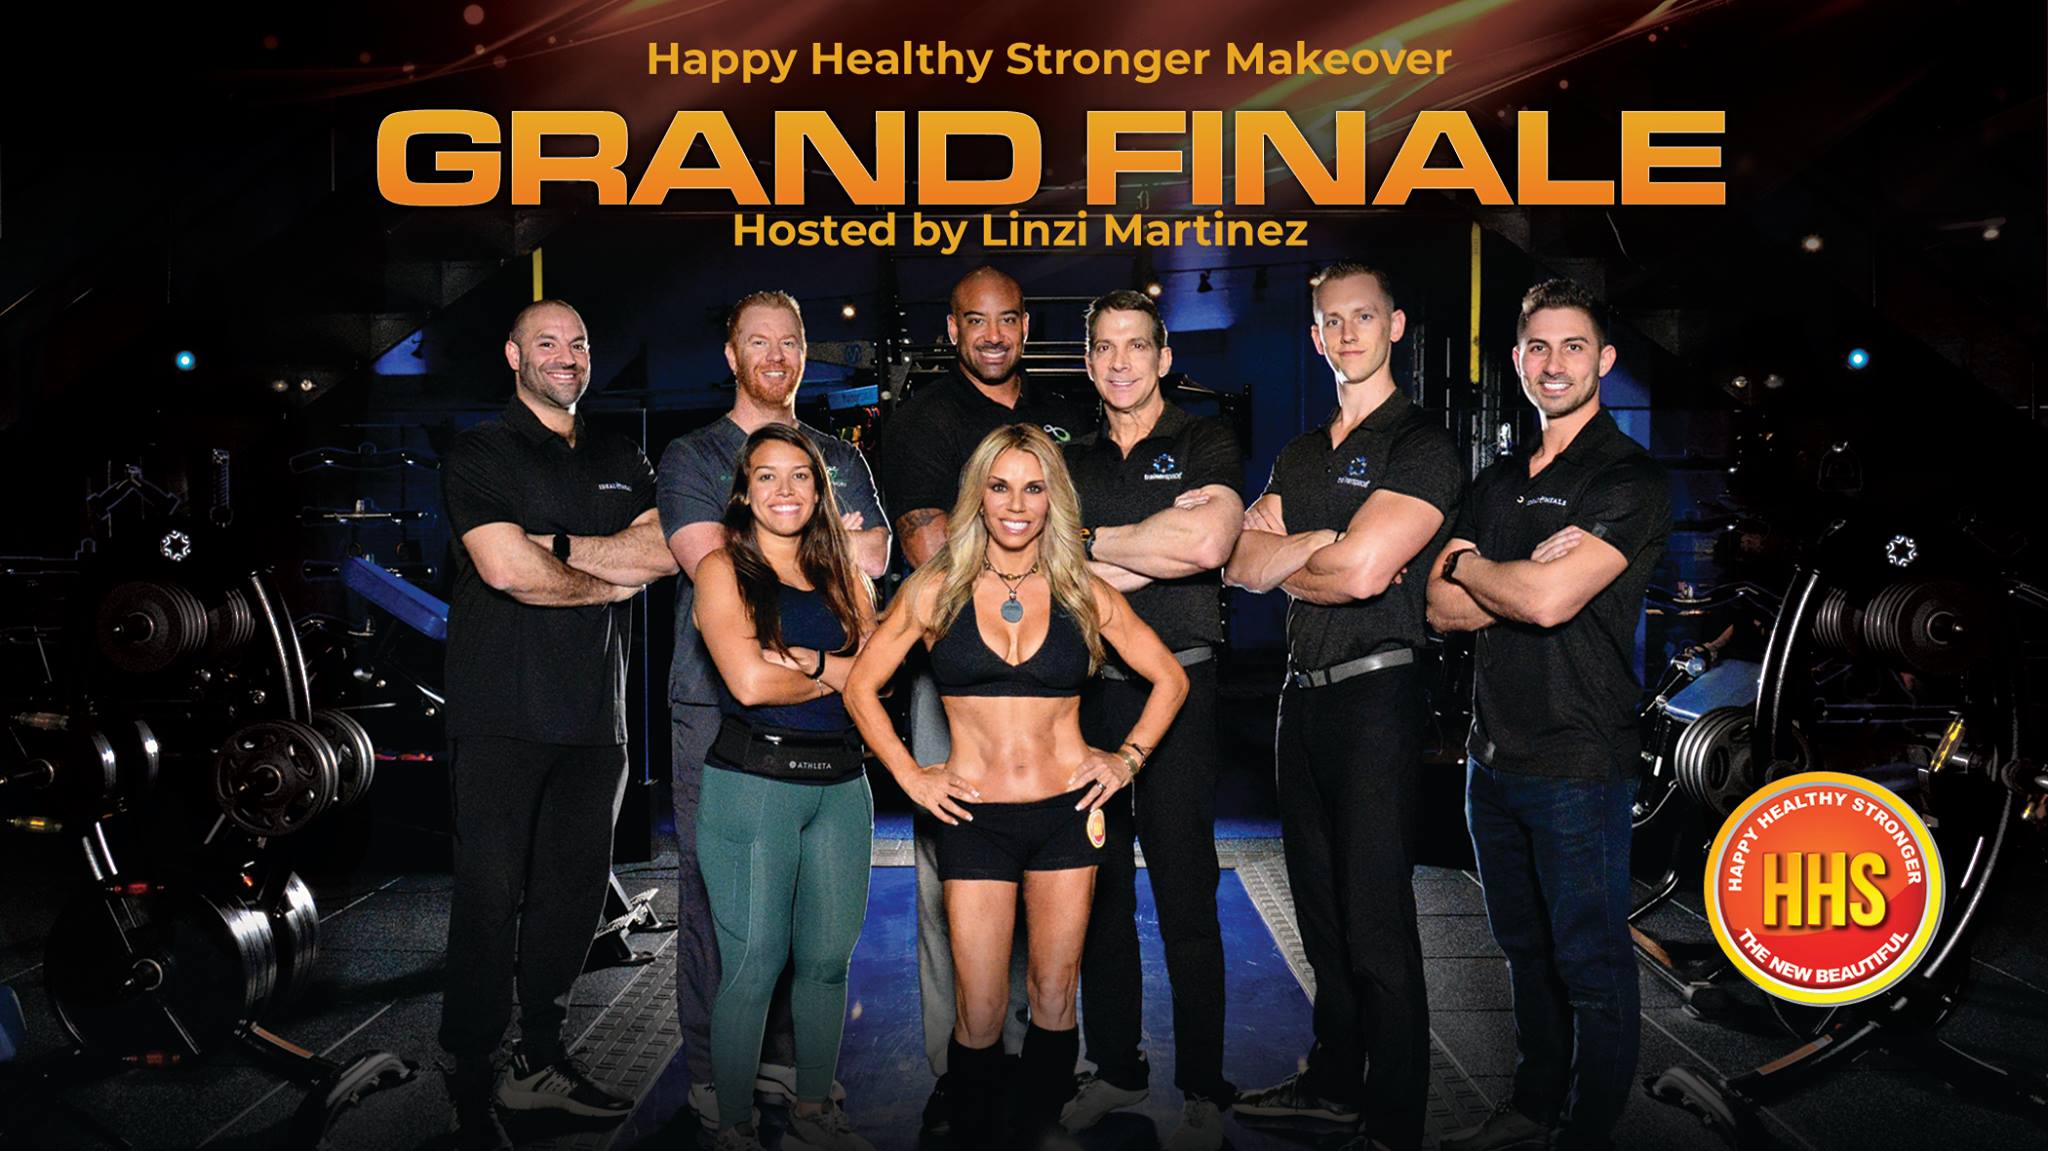 Happy Healthy Stronger Makeover Grand Finale